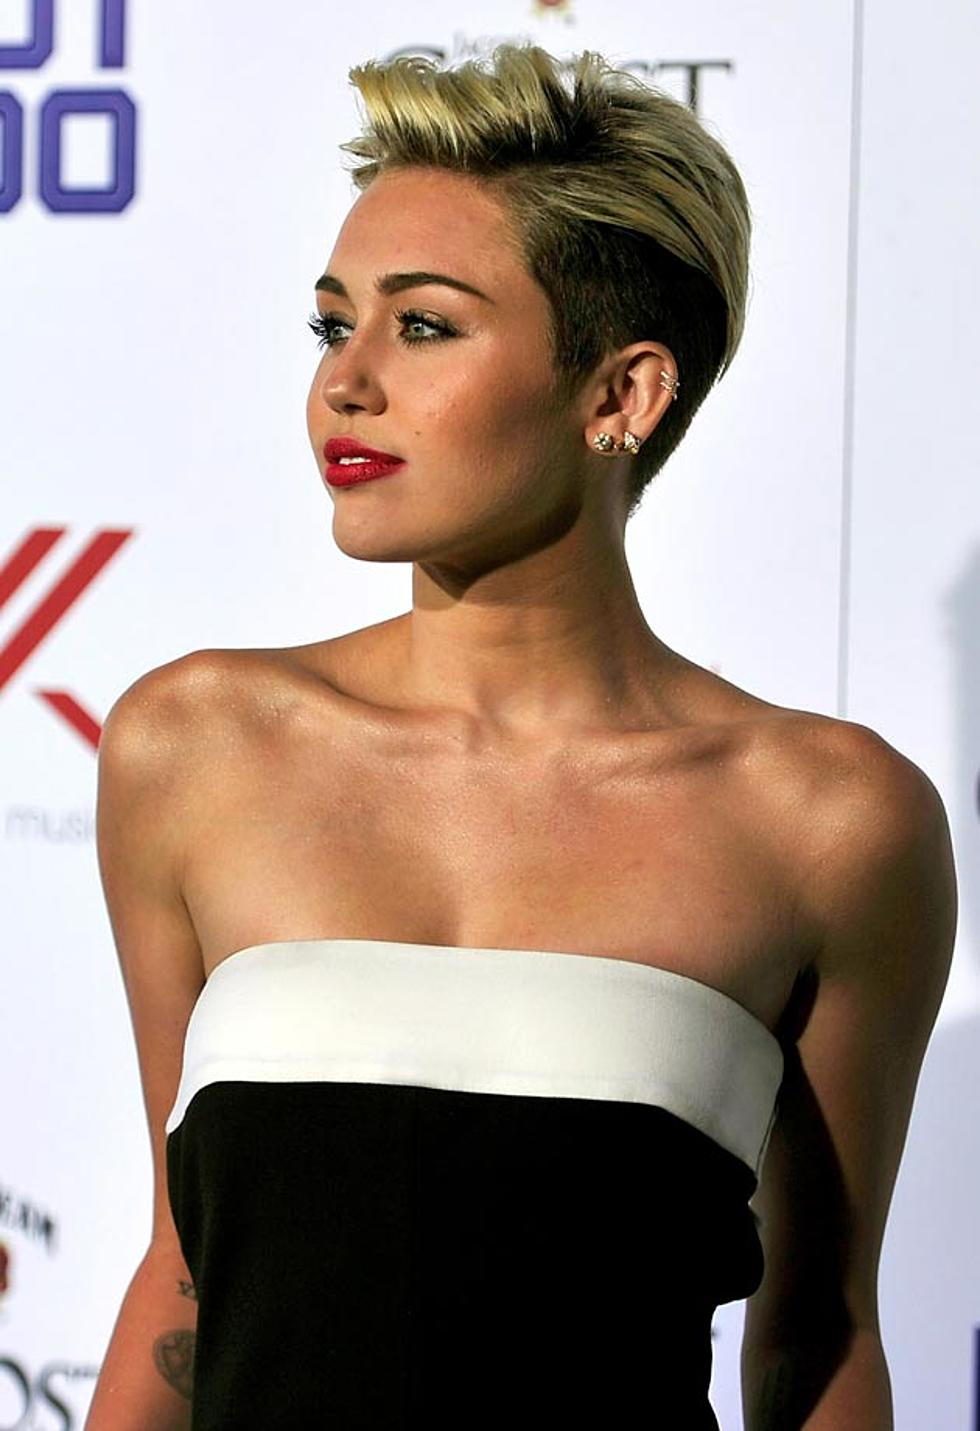 Miley Cyrus Glams It Up in Valentino Jumpsuit at Maxim Hot 100 Party [Pics]